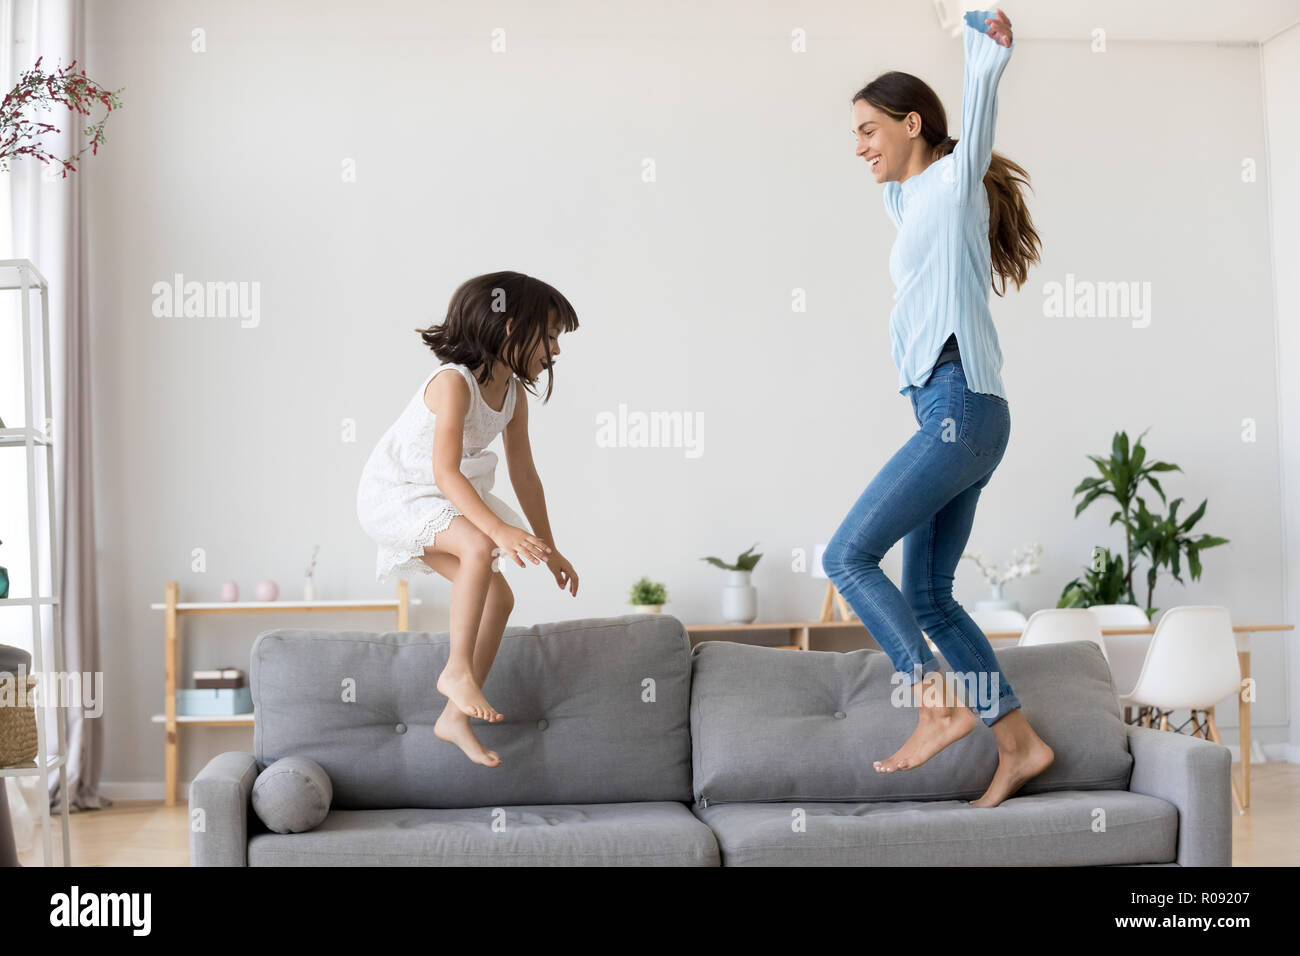 Mother and little daughter having fun jumping on couch Stock Photo